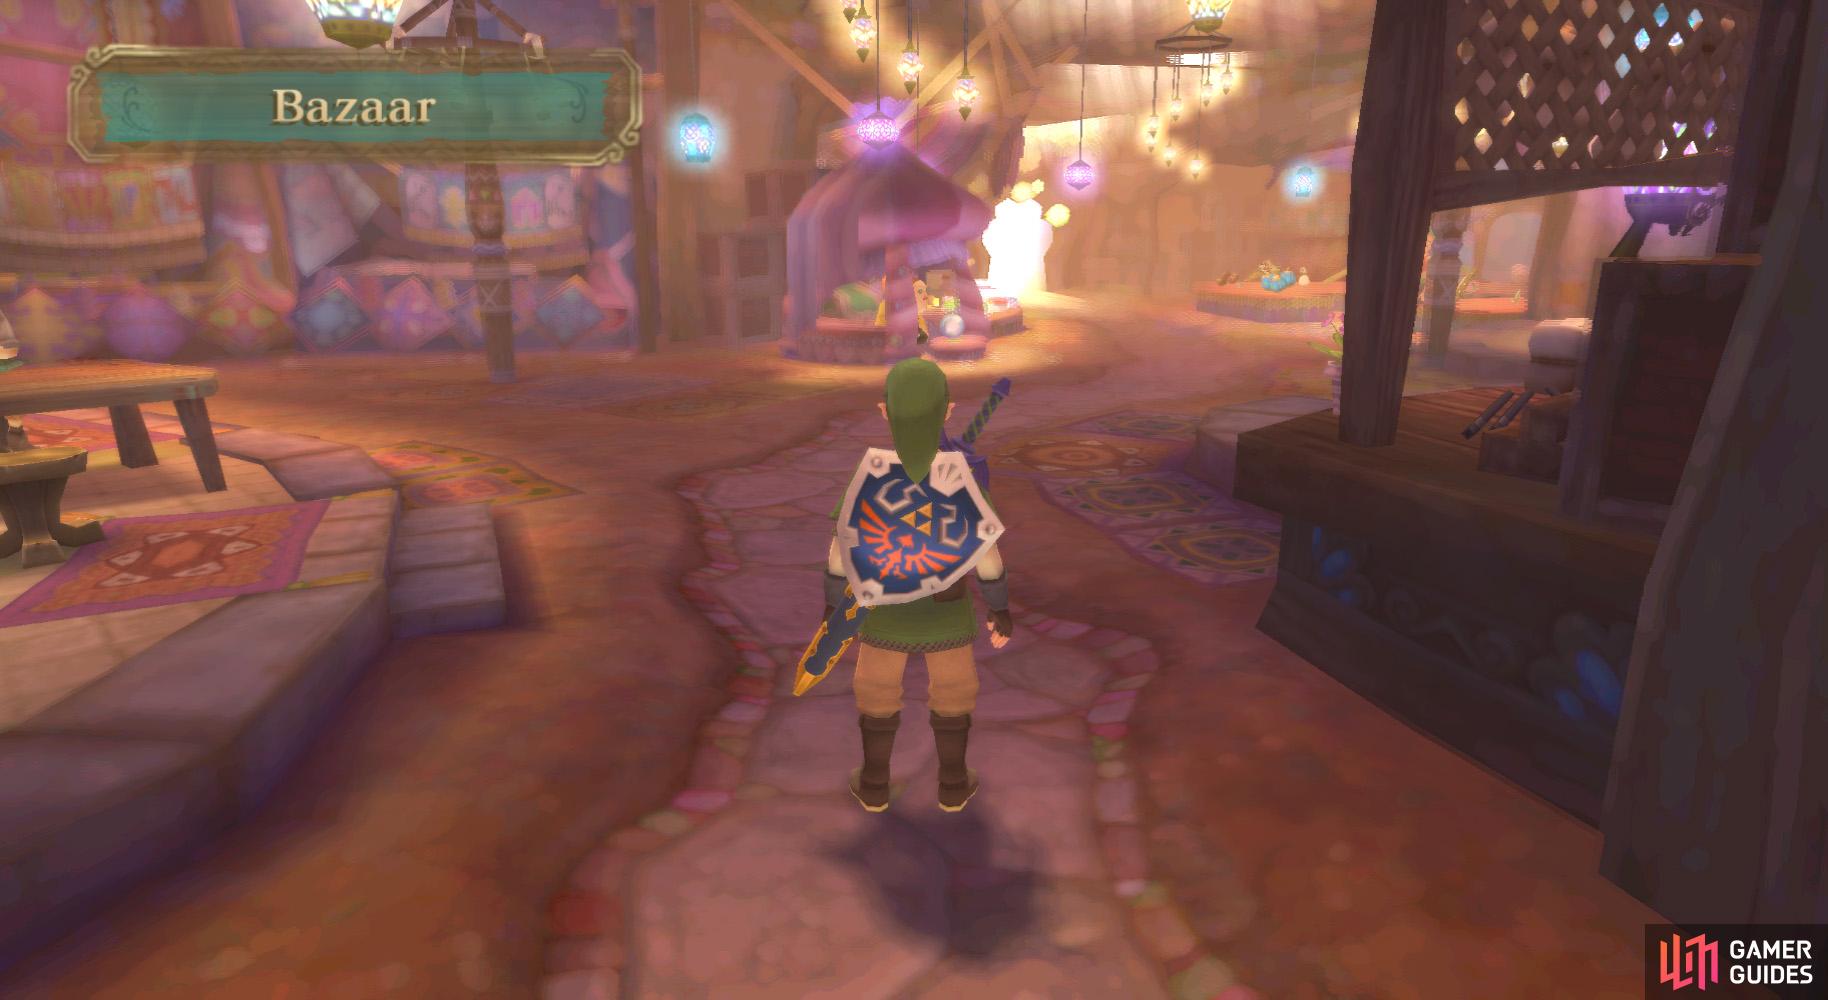 The Bazaar is a tight knit collection of shops perfect for budding adventurers like Link.